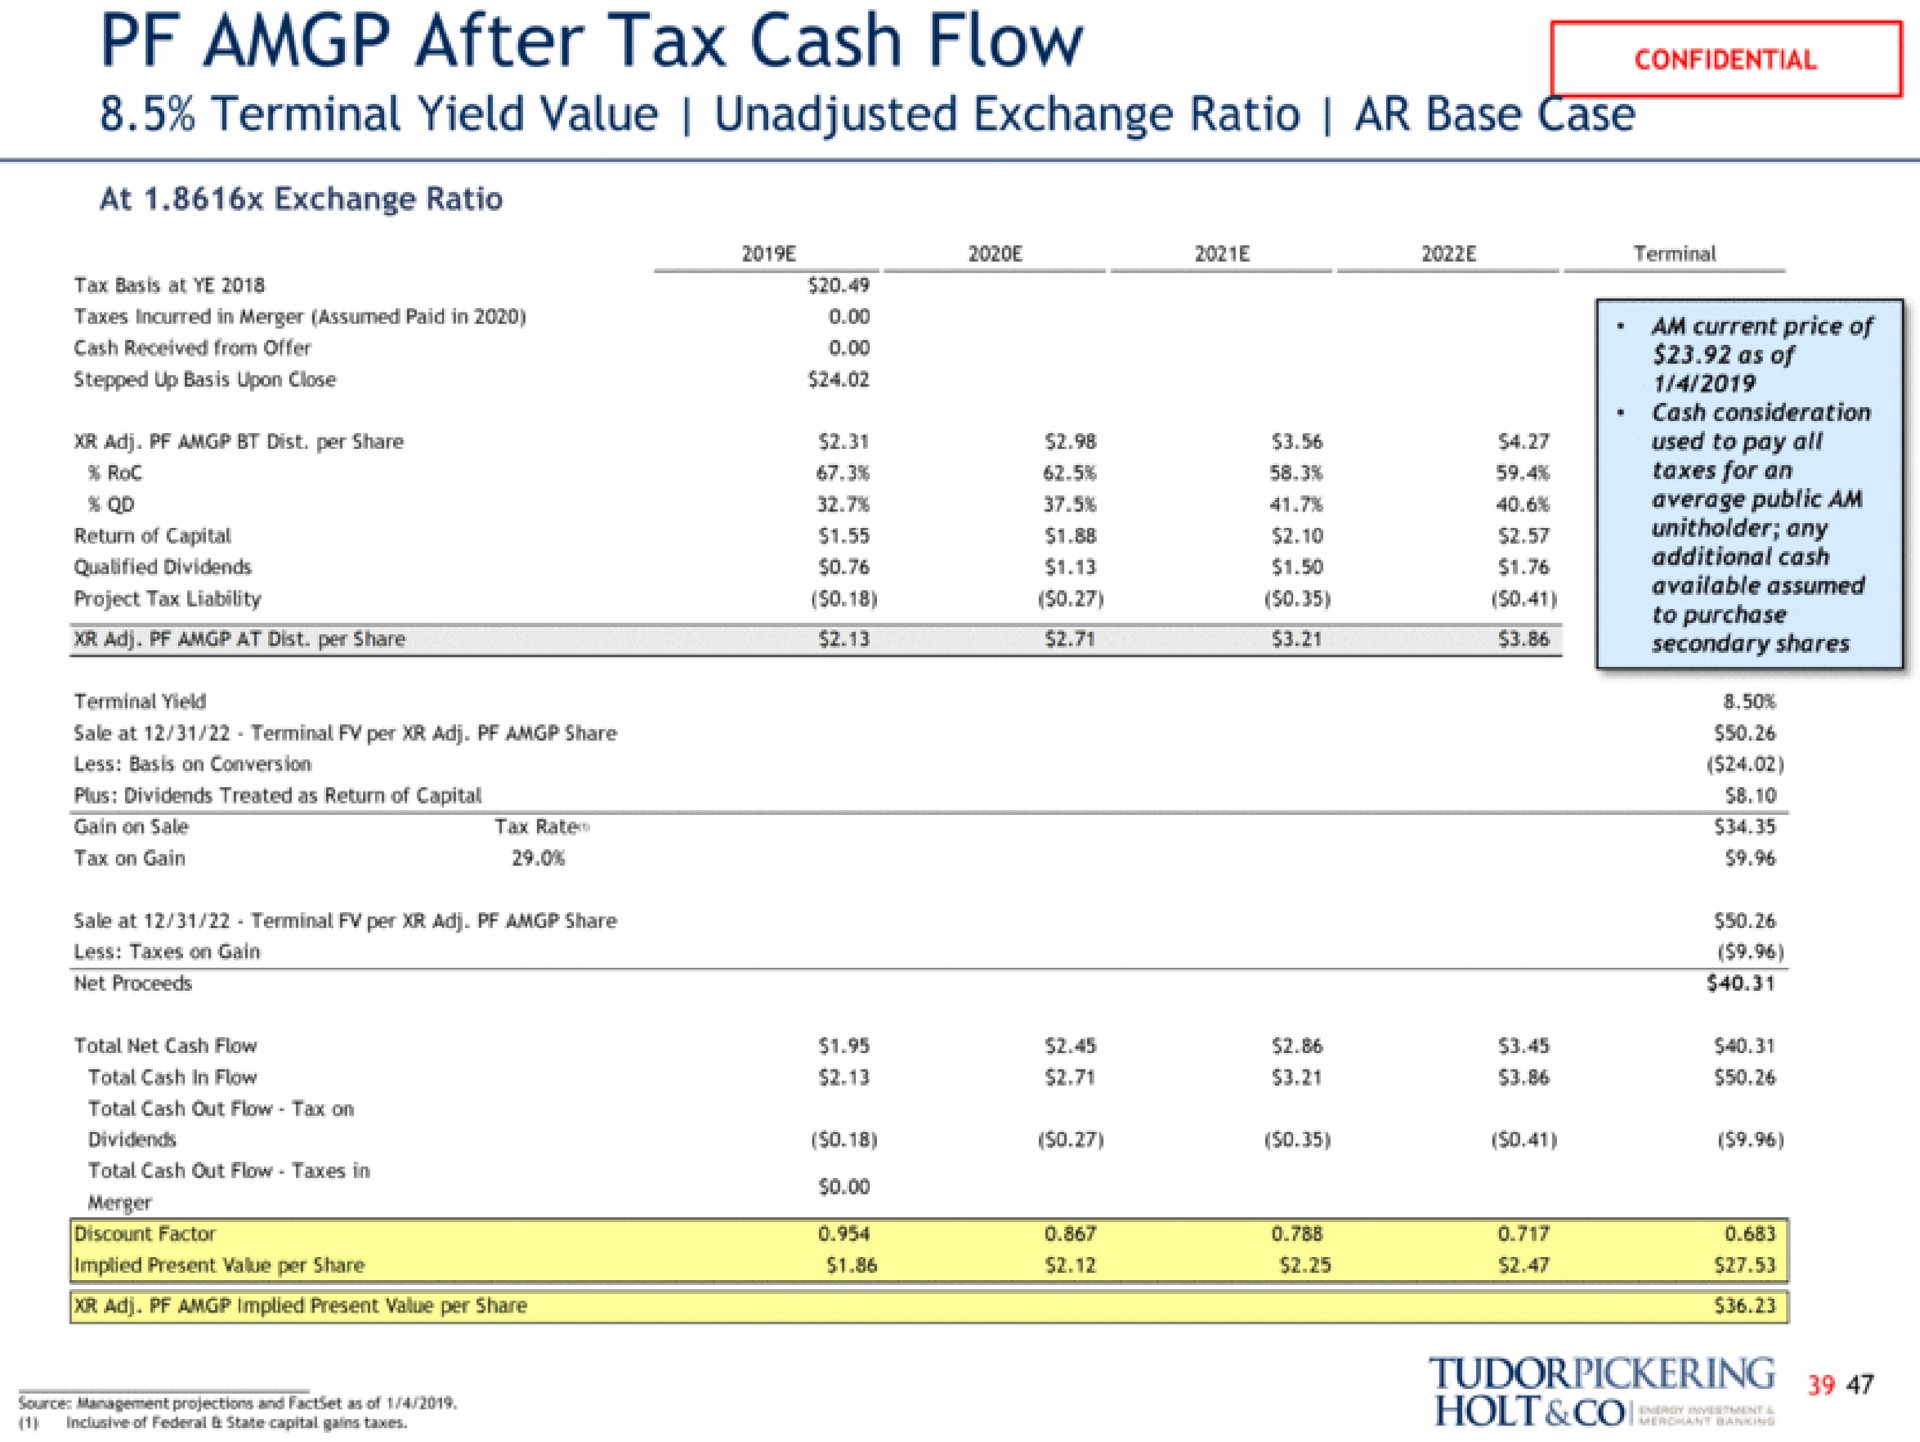 after tax cash flow terminal yield value unadjusted exchange ratio base case iyo holt | Tudor, Pickering, Holt & Co